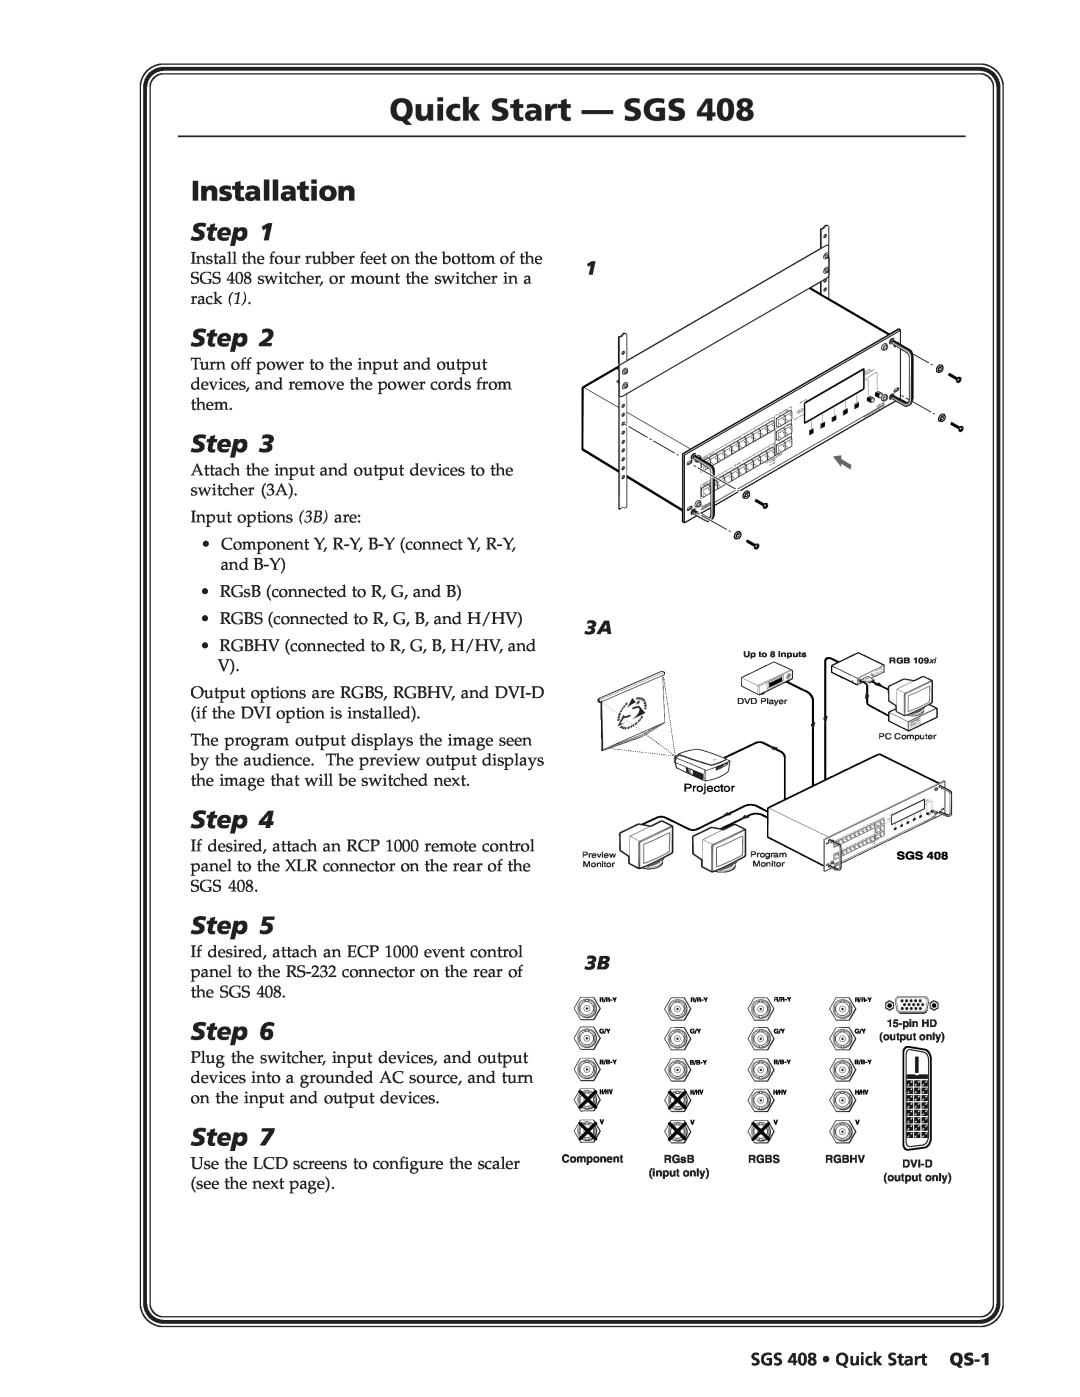 Extron electronic manual Quick Start - SGS, Installation, SGS 408 Quick Start QS-1, Step 